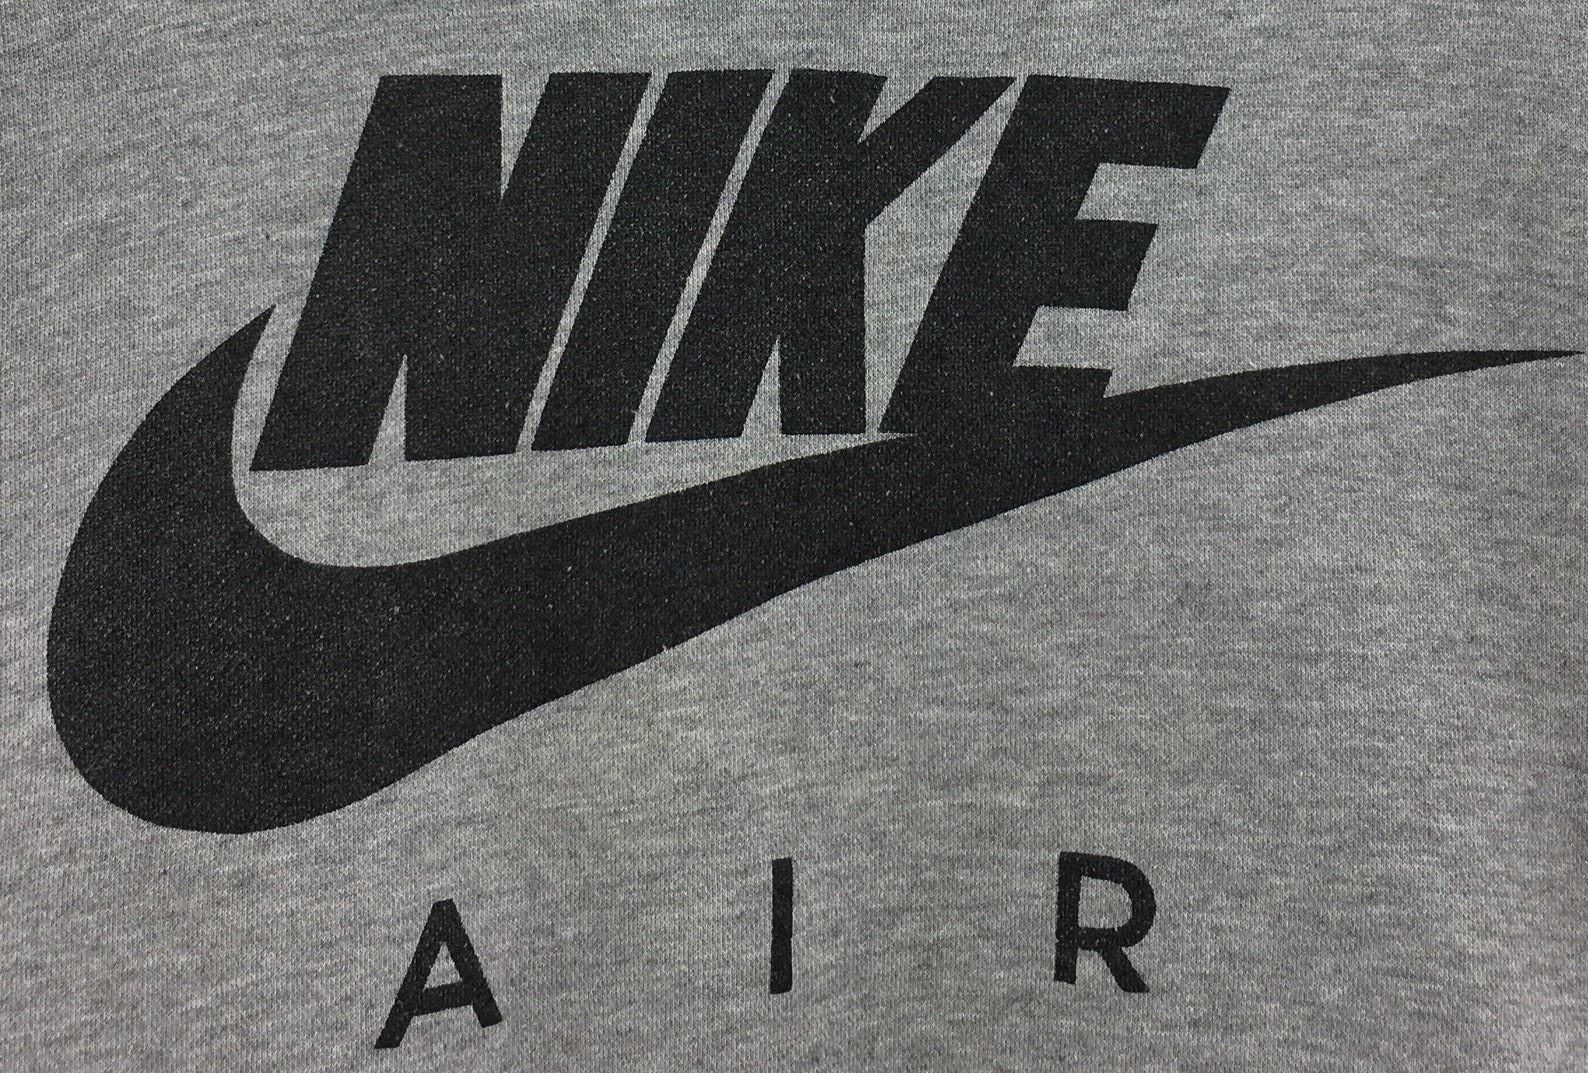 Limited Vintage Nike Air Swoosh Big Logo Spell Out Print - Etsy